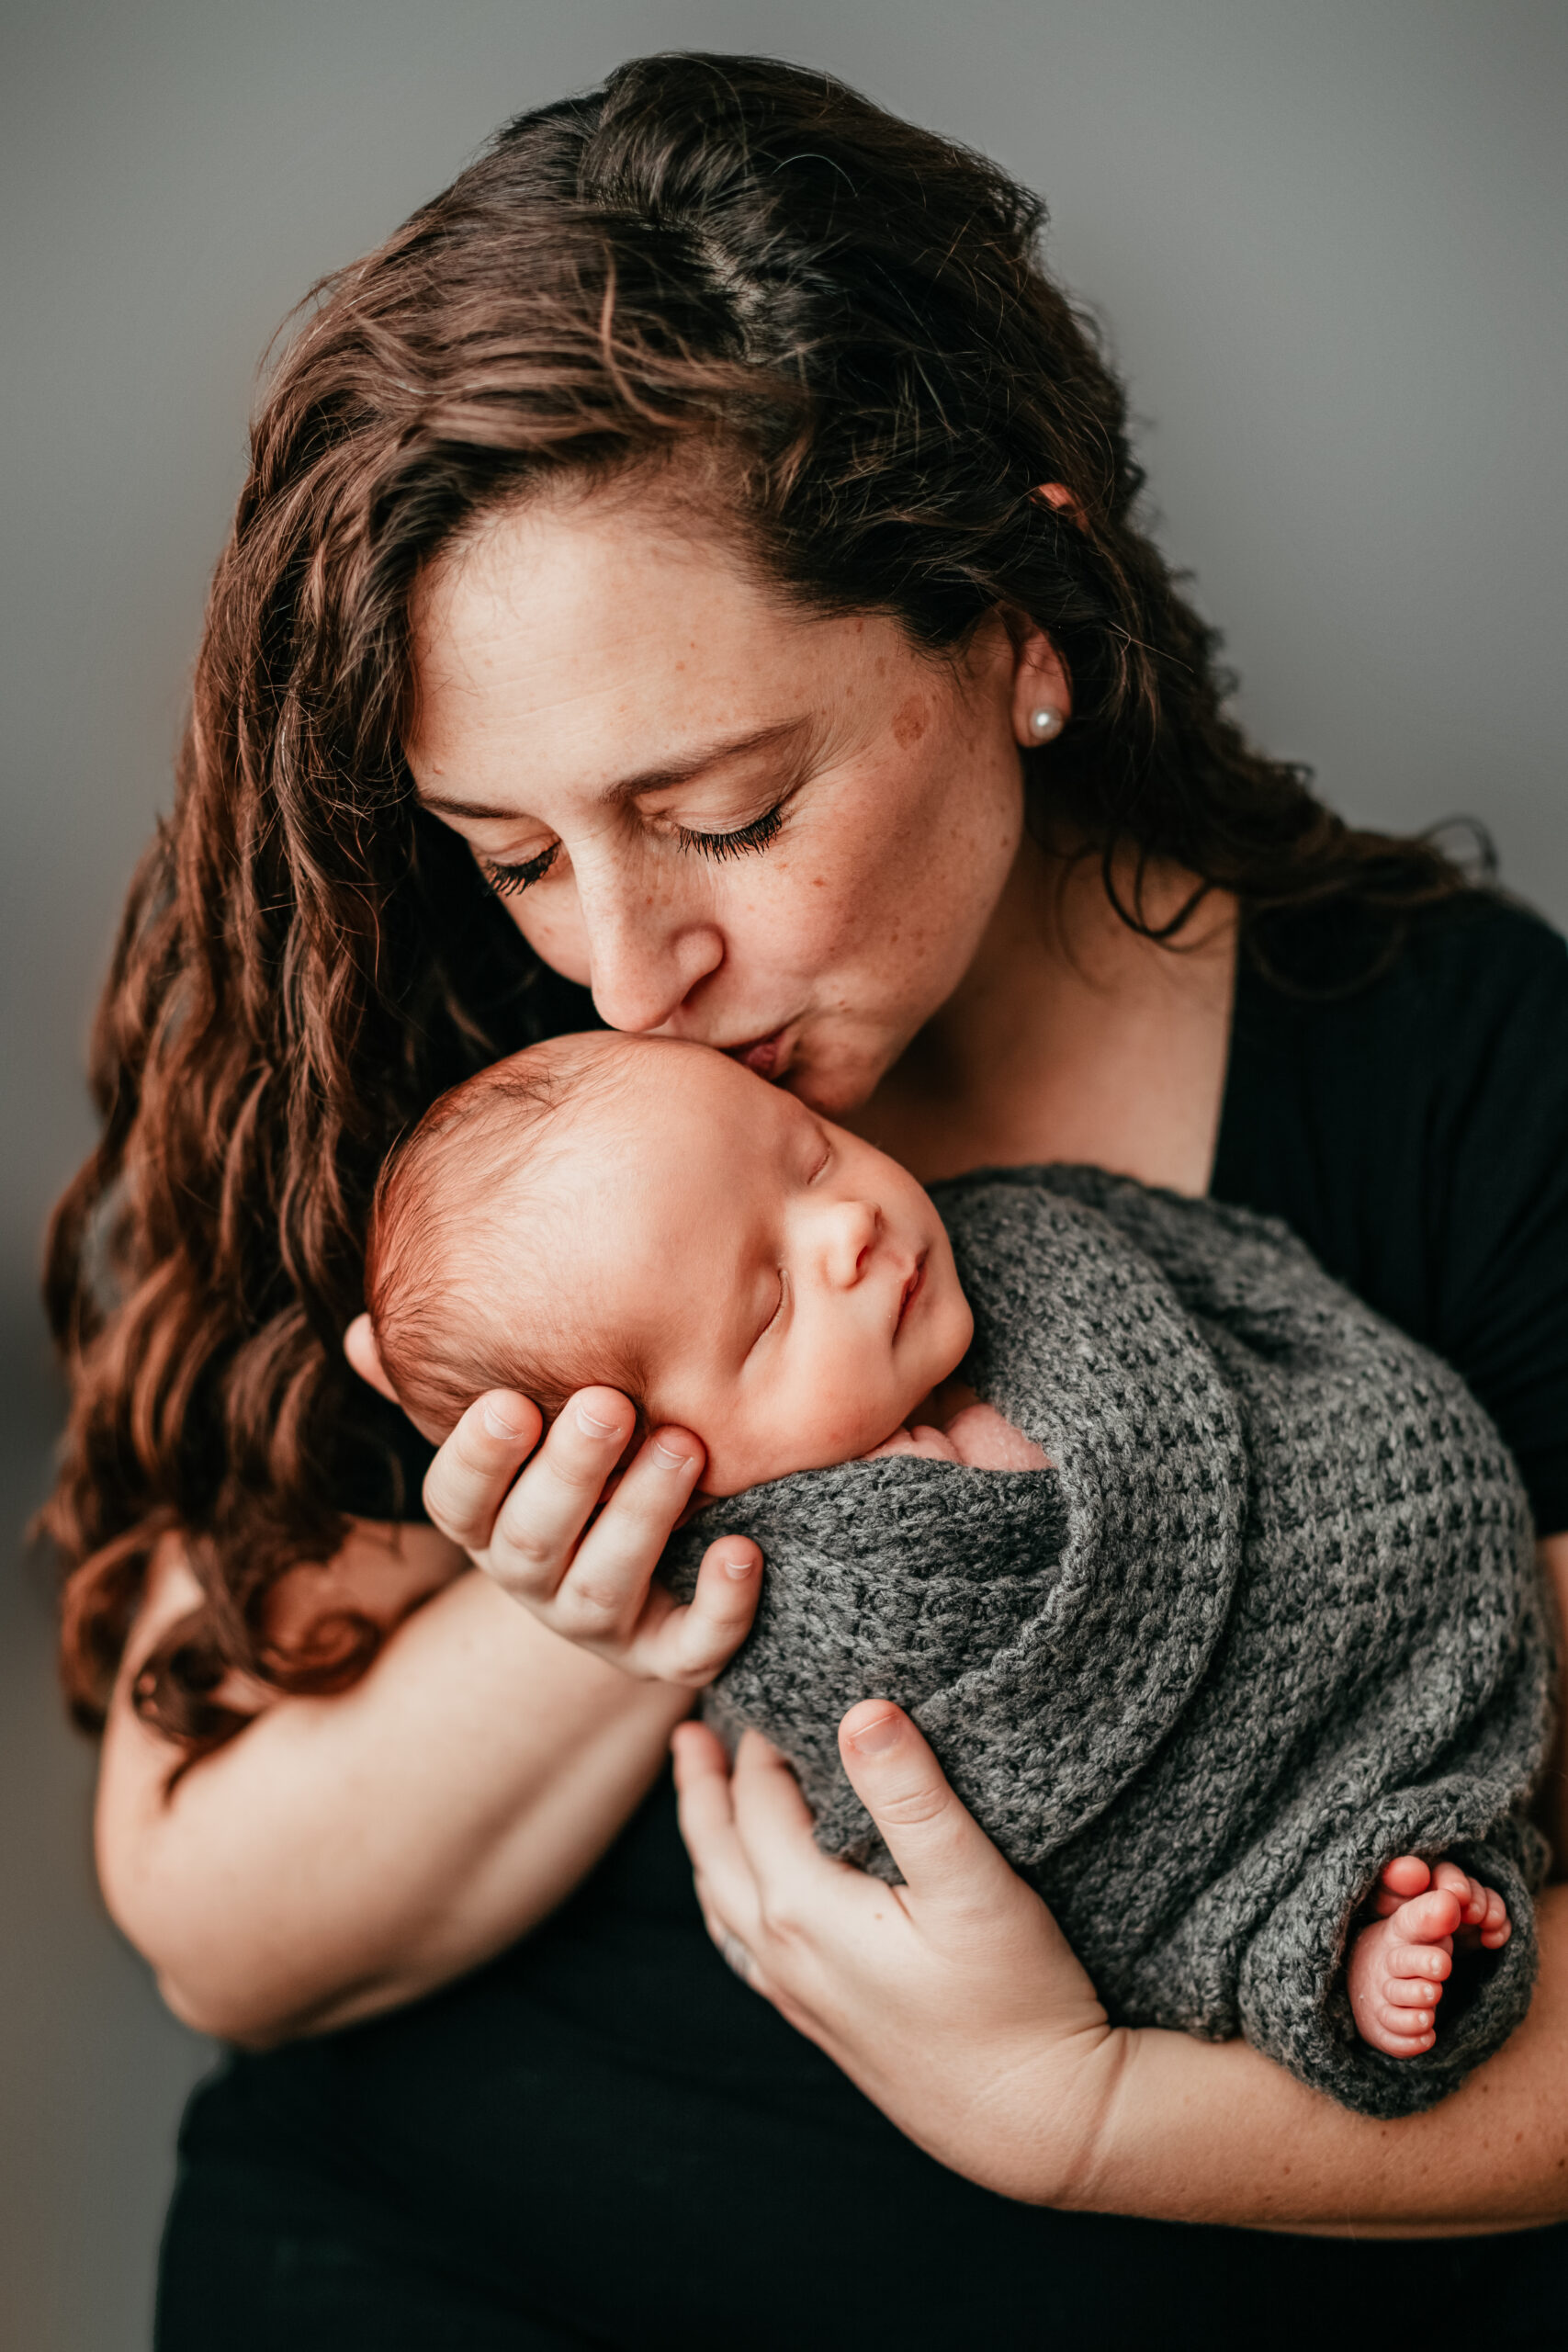 new mom kissing her newborn baby on the head Nashville Midwives